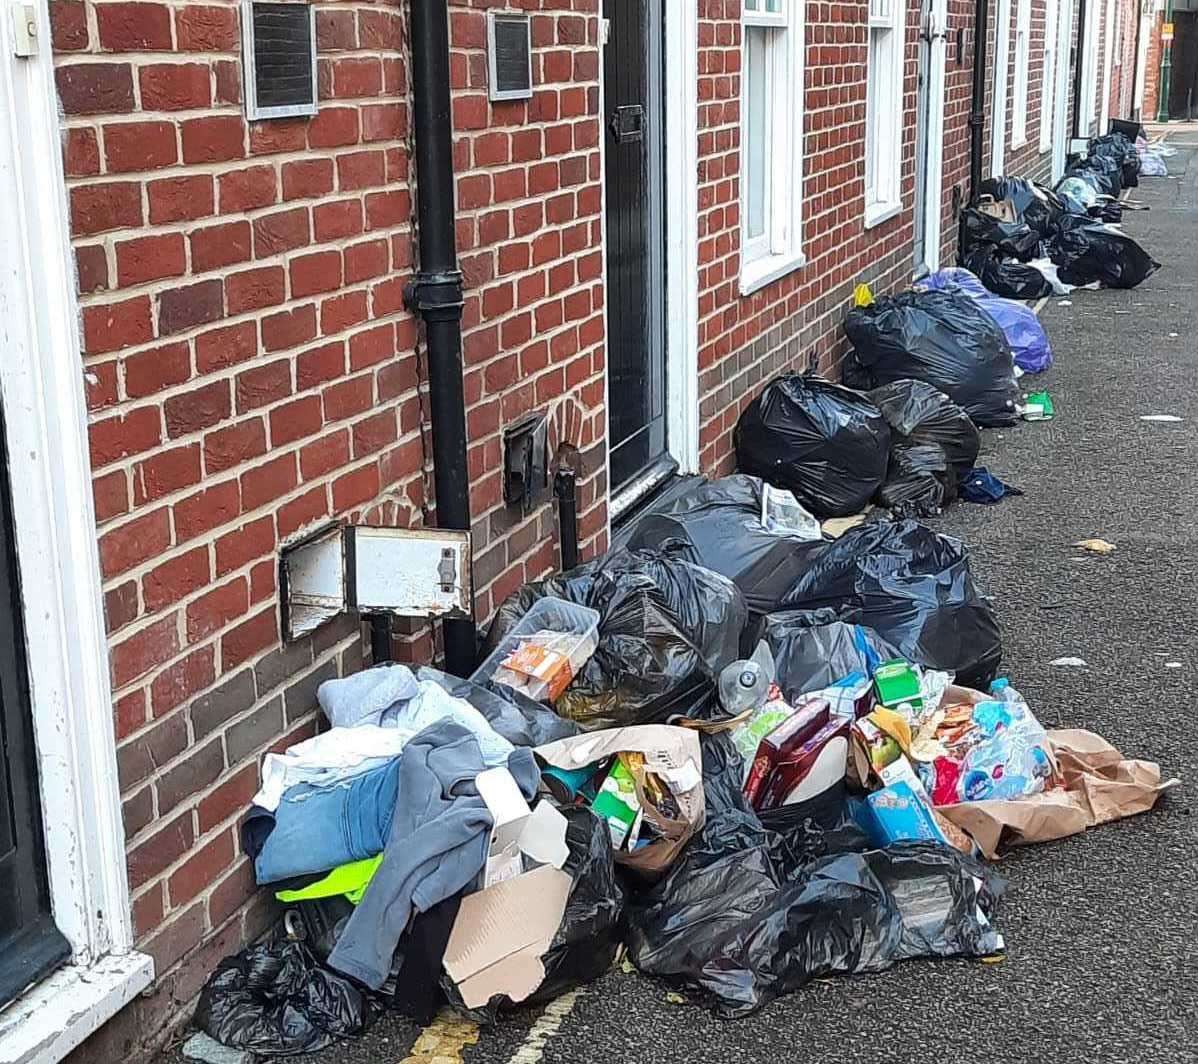 The council says the level of rubbish has not been acceptable. Picture: Pat Gorman